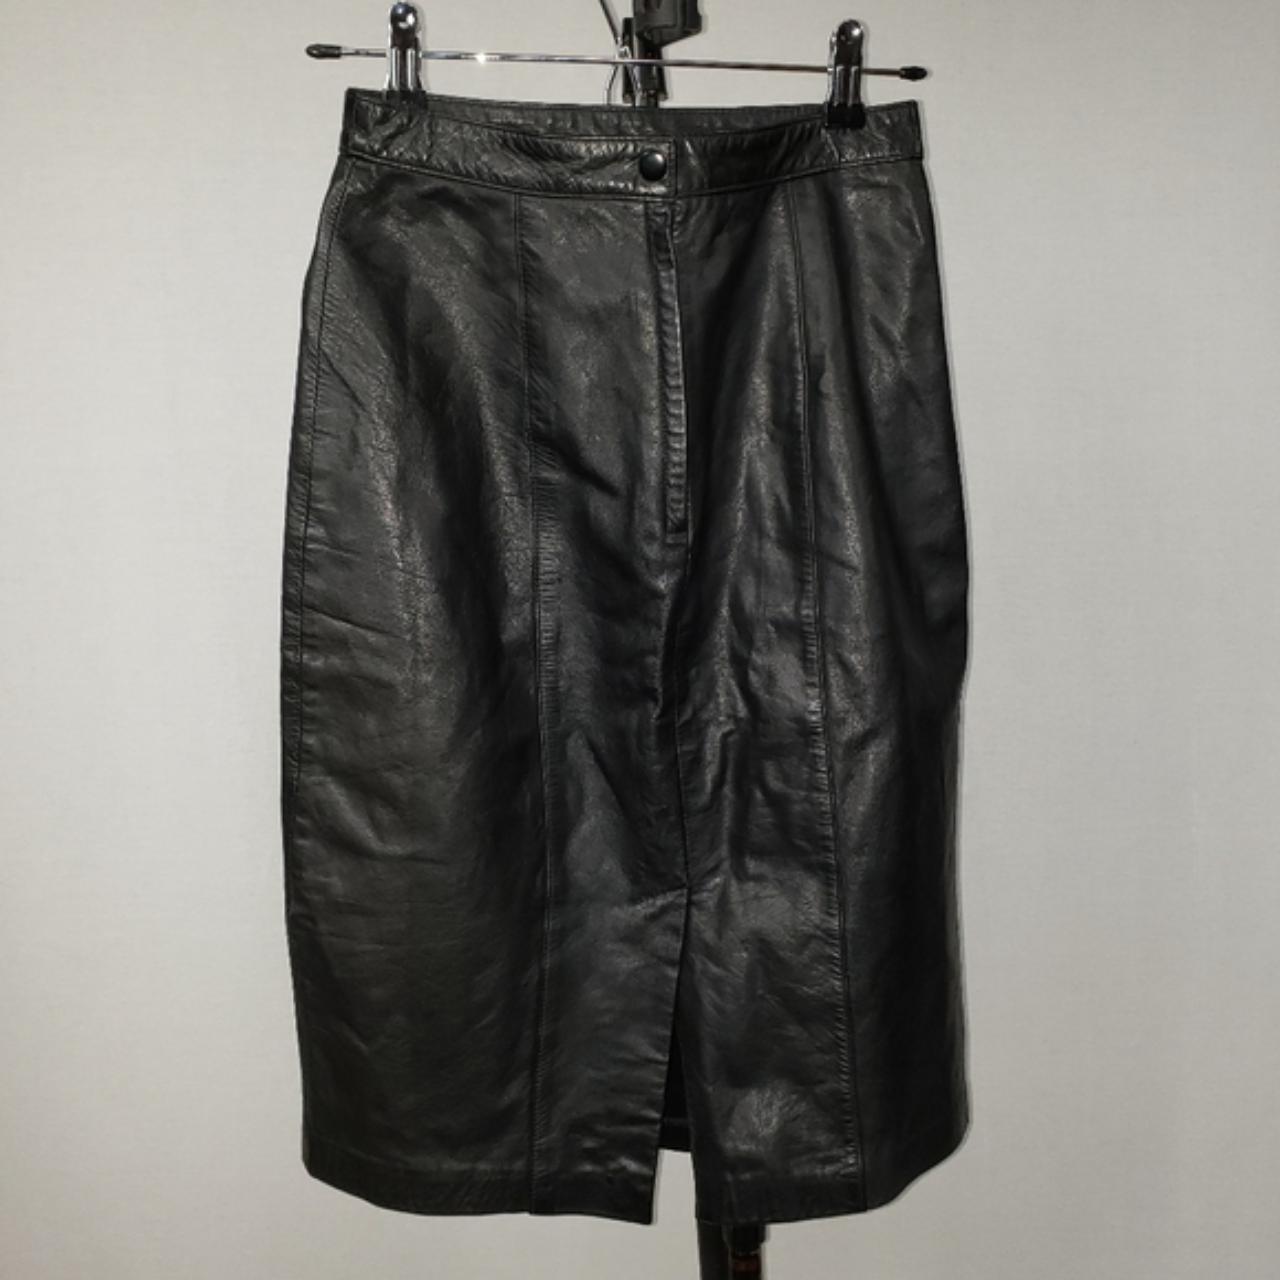 Vintage leather Lord & Taylor skirt. 24